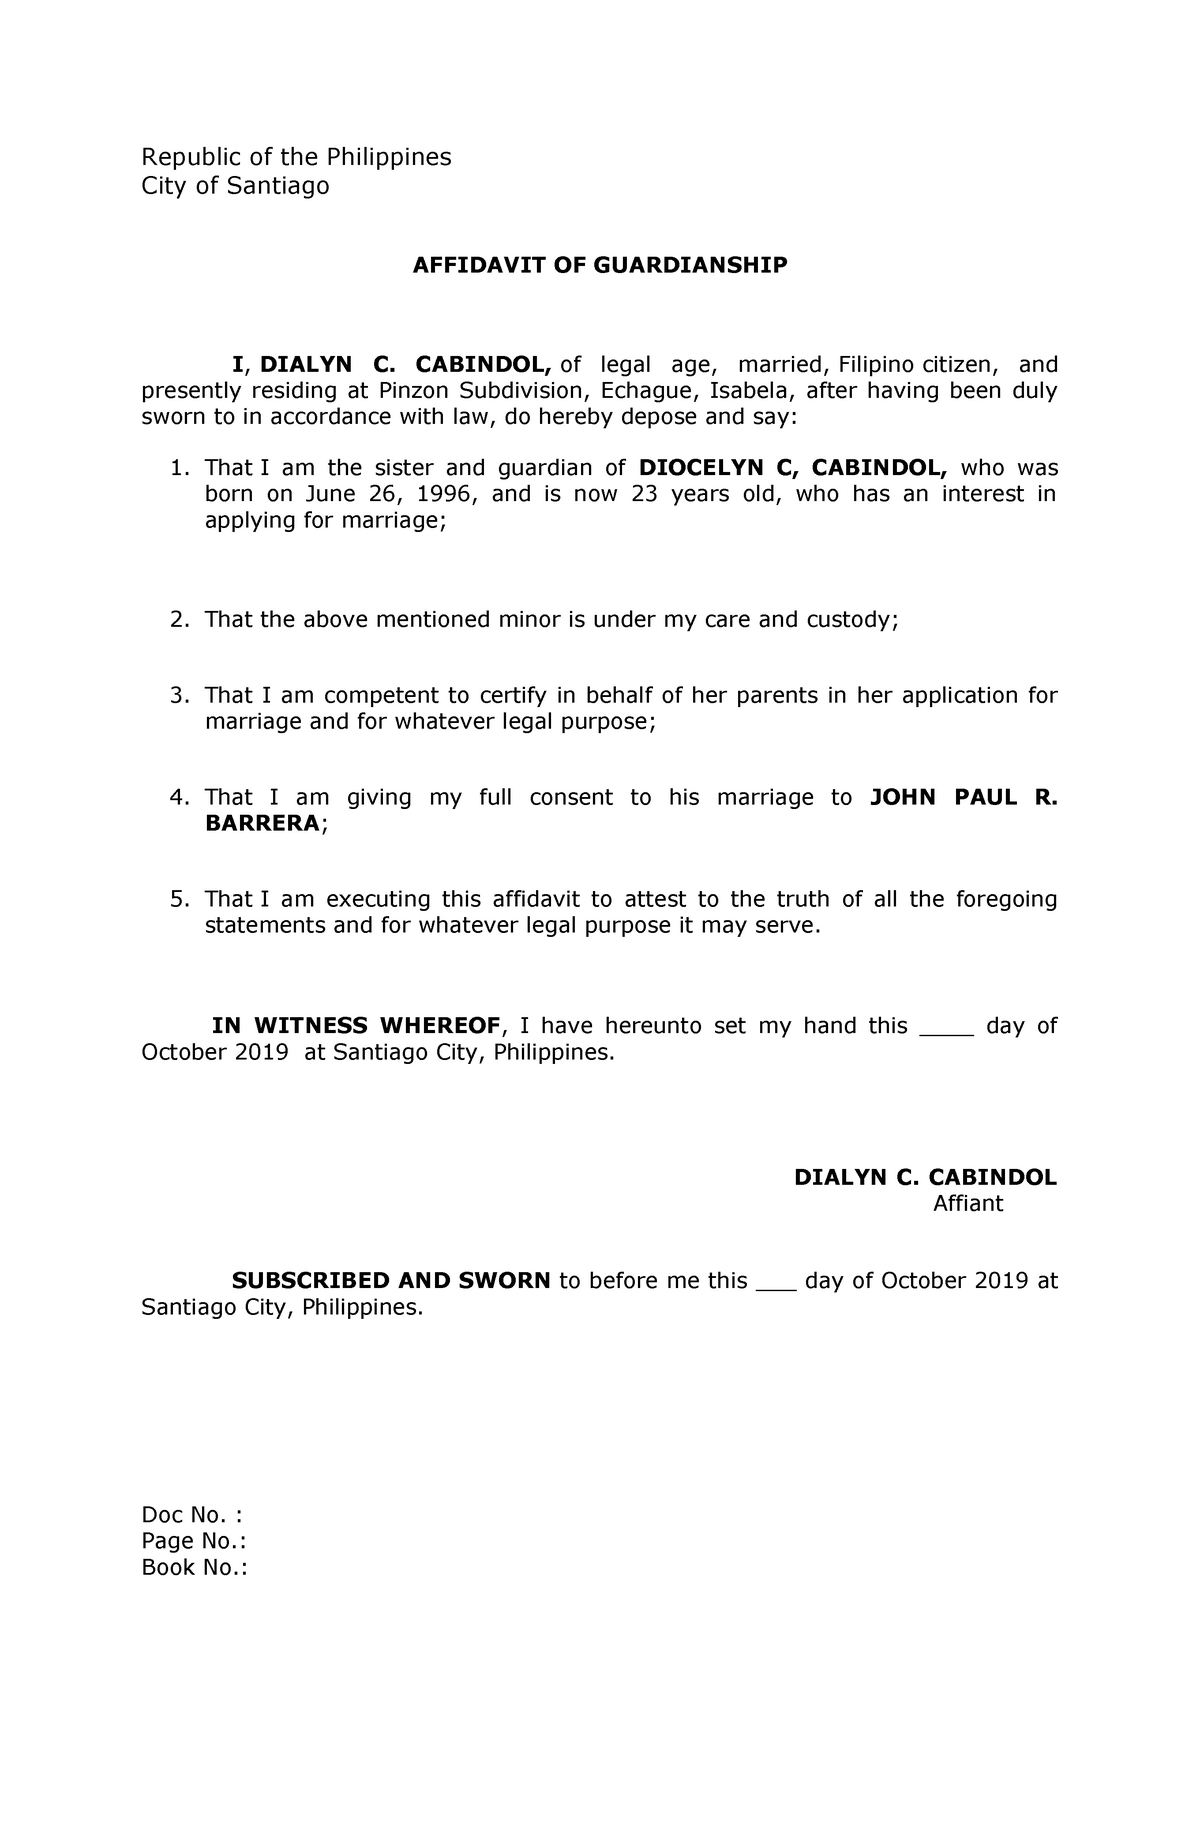 Aff Of Guardianship Feel Free To Read Republic Of The Philippines City Of Santiago Affidavit 3025